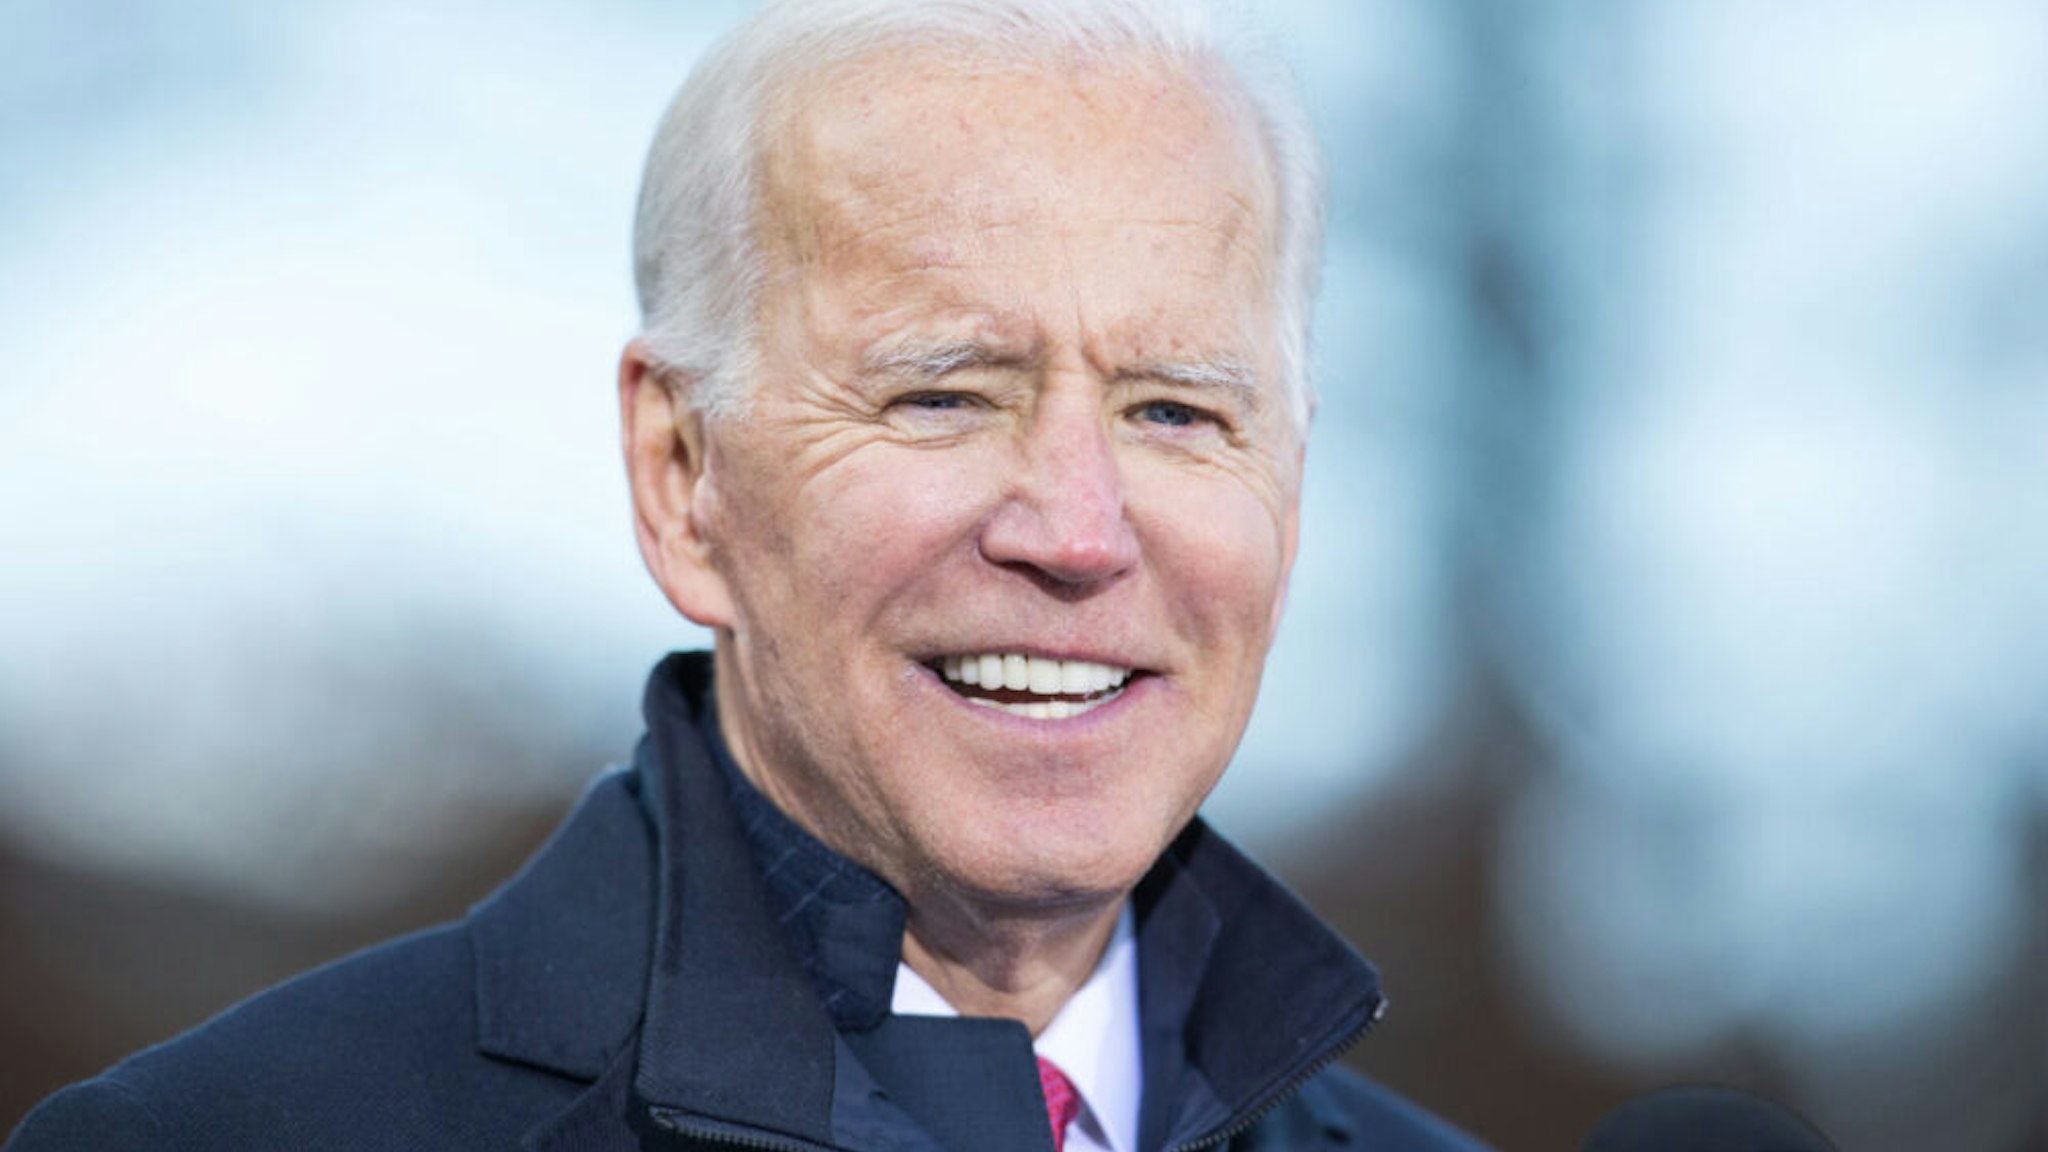 CONCORD, NH - NOVEMBER 08: Democratic presidential candidate, former vice President Joe Biden speaks during a rally after he signed his official paperwork for the New Hampshire Primary at the New Hampshire State House on November 8, 2019 in Concord, New Hampshire. The state's first-in-the-nation primary will be held on February 11, 2020.